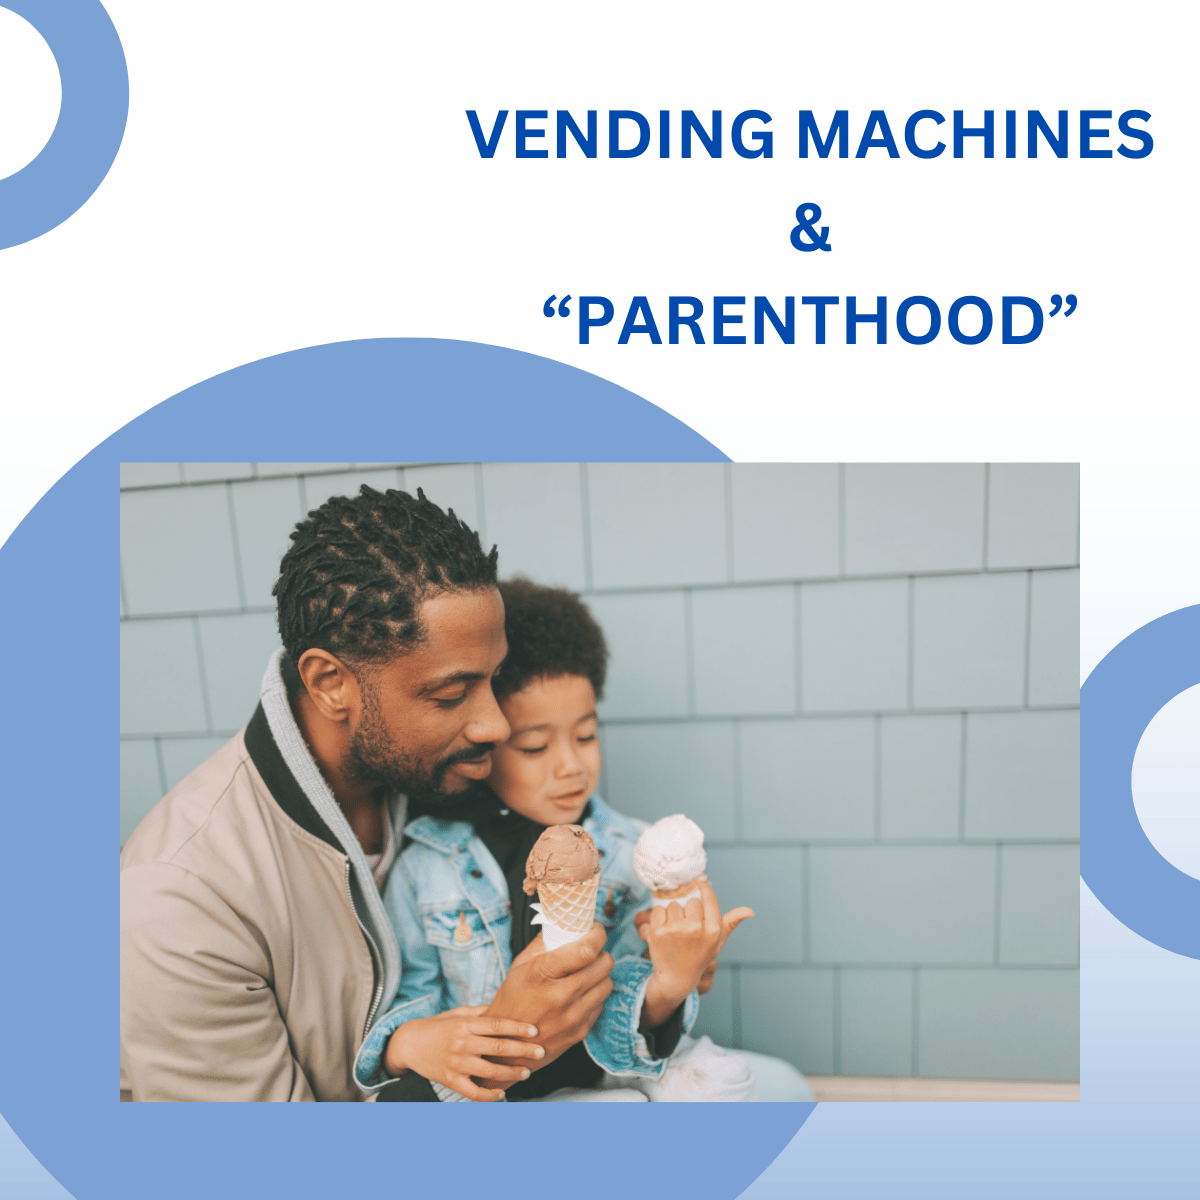 VENDING MACHINES PLAY KEY ROLE IN “PARENTHOOD” EPISODE